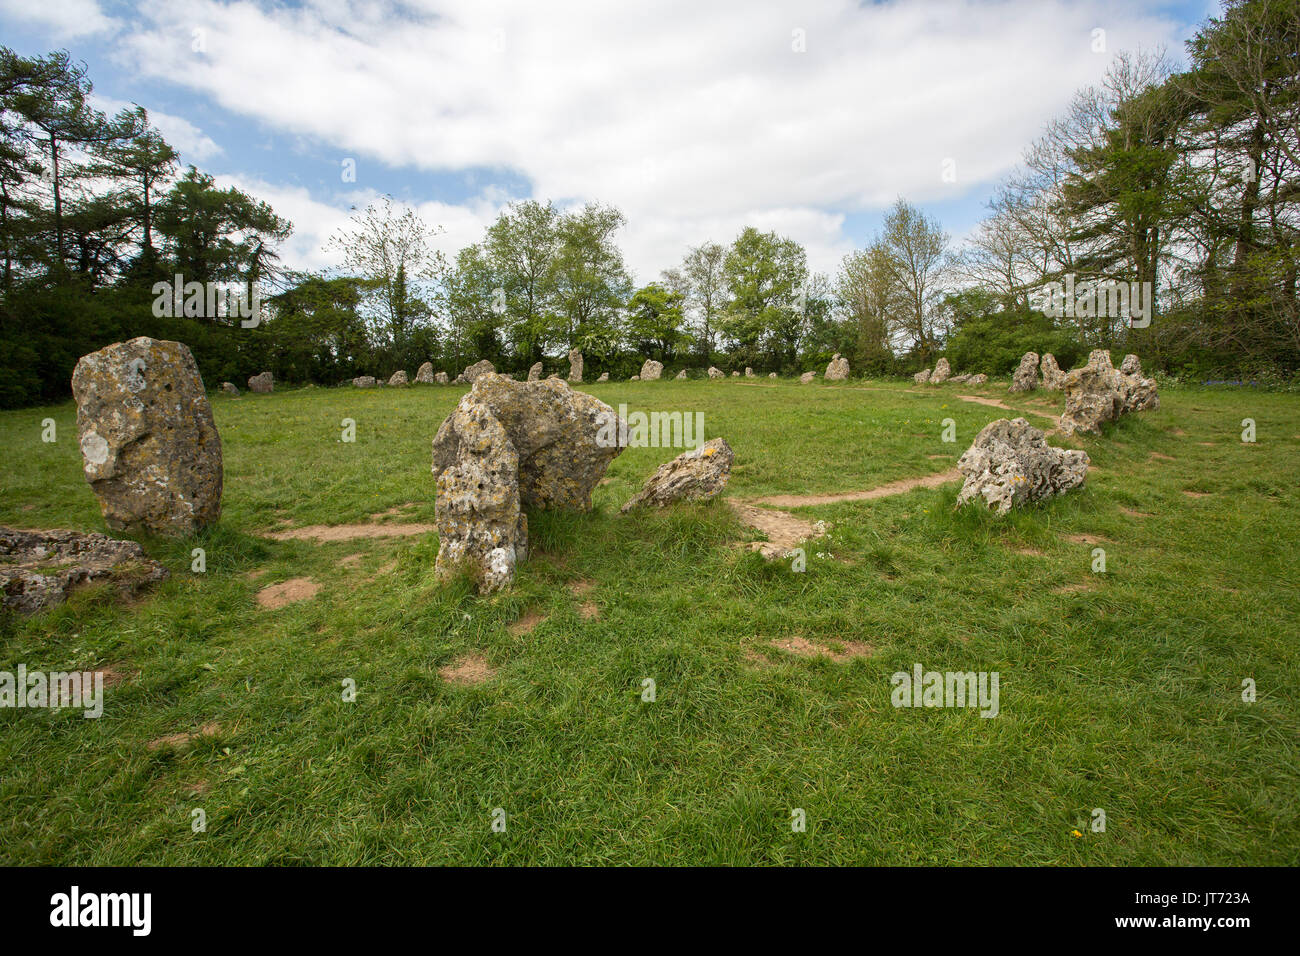 The King's Men stone circle, feature of Rollright ancient stones in Cotswold Hills, Oxfordshire, England Stock Photo